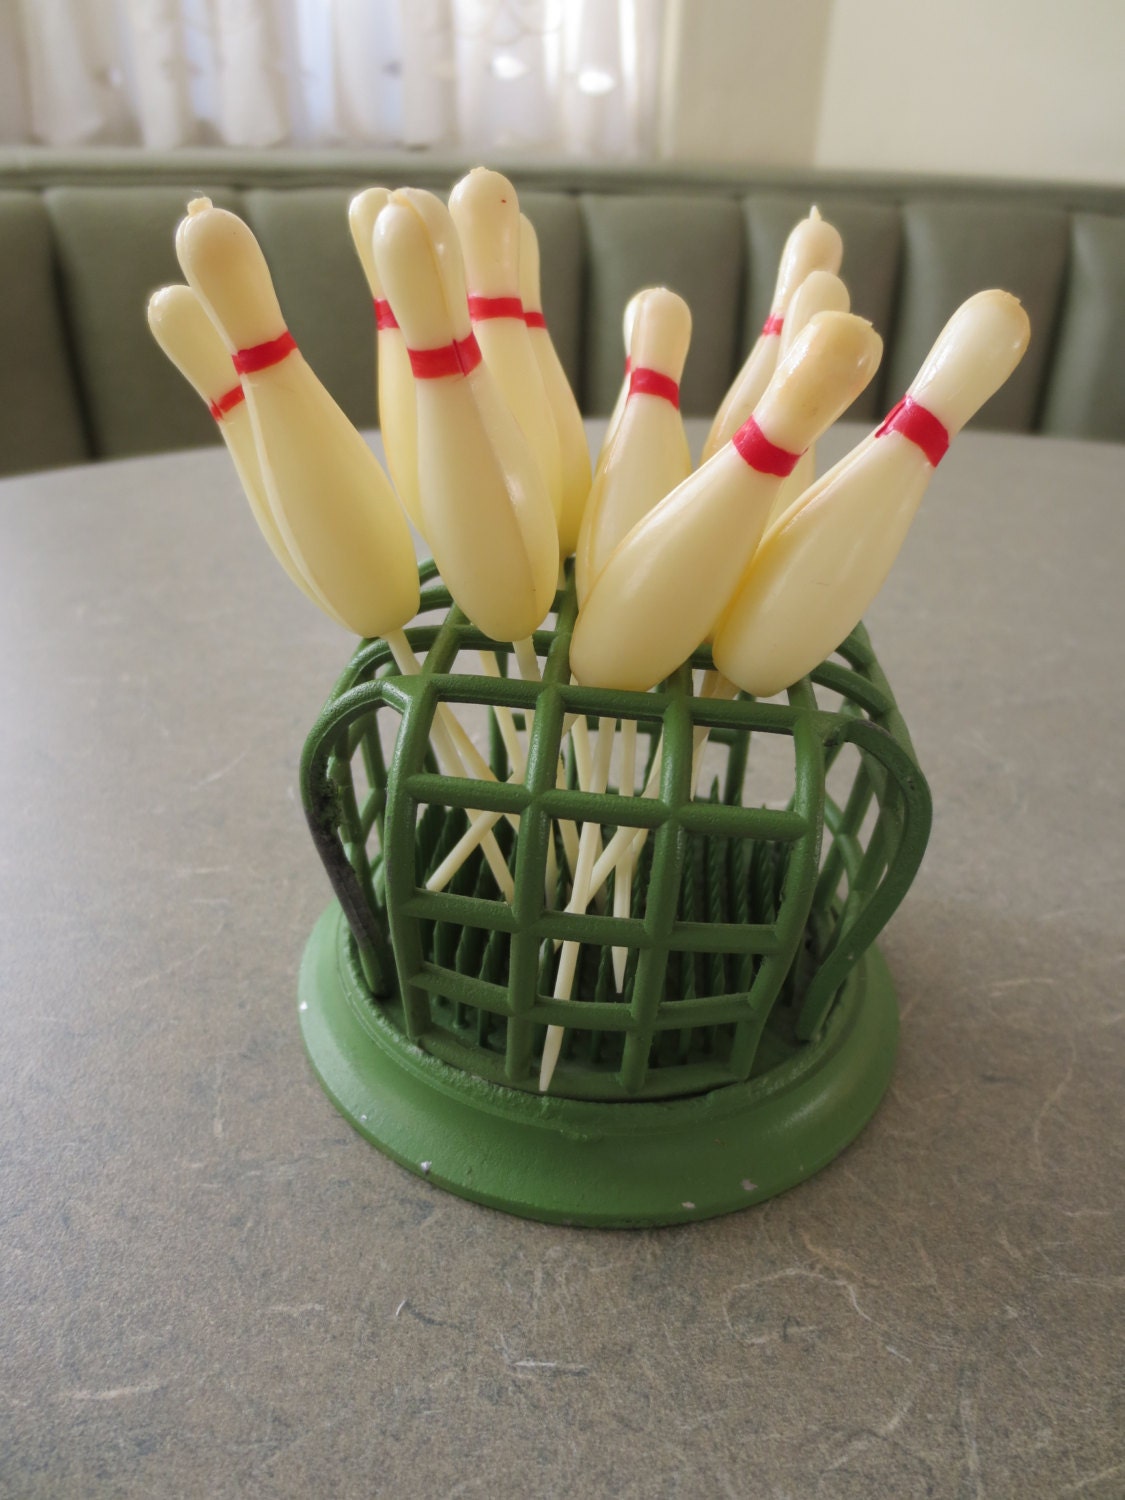 Vintage Mini Bowling Pins Plastic Bowling Pins Cake Toppers